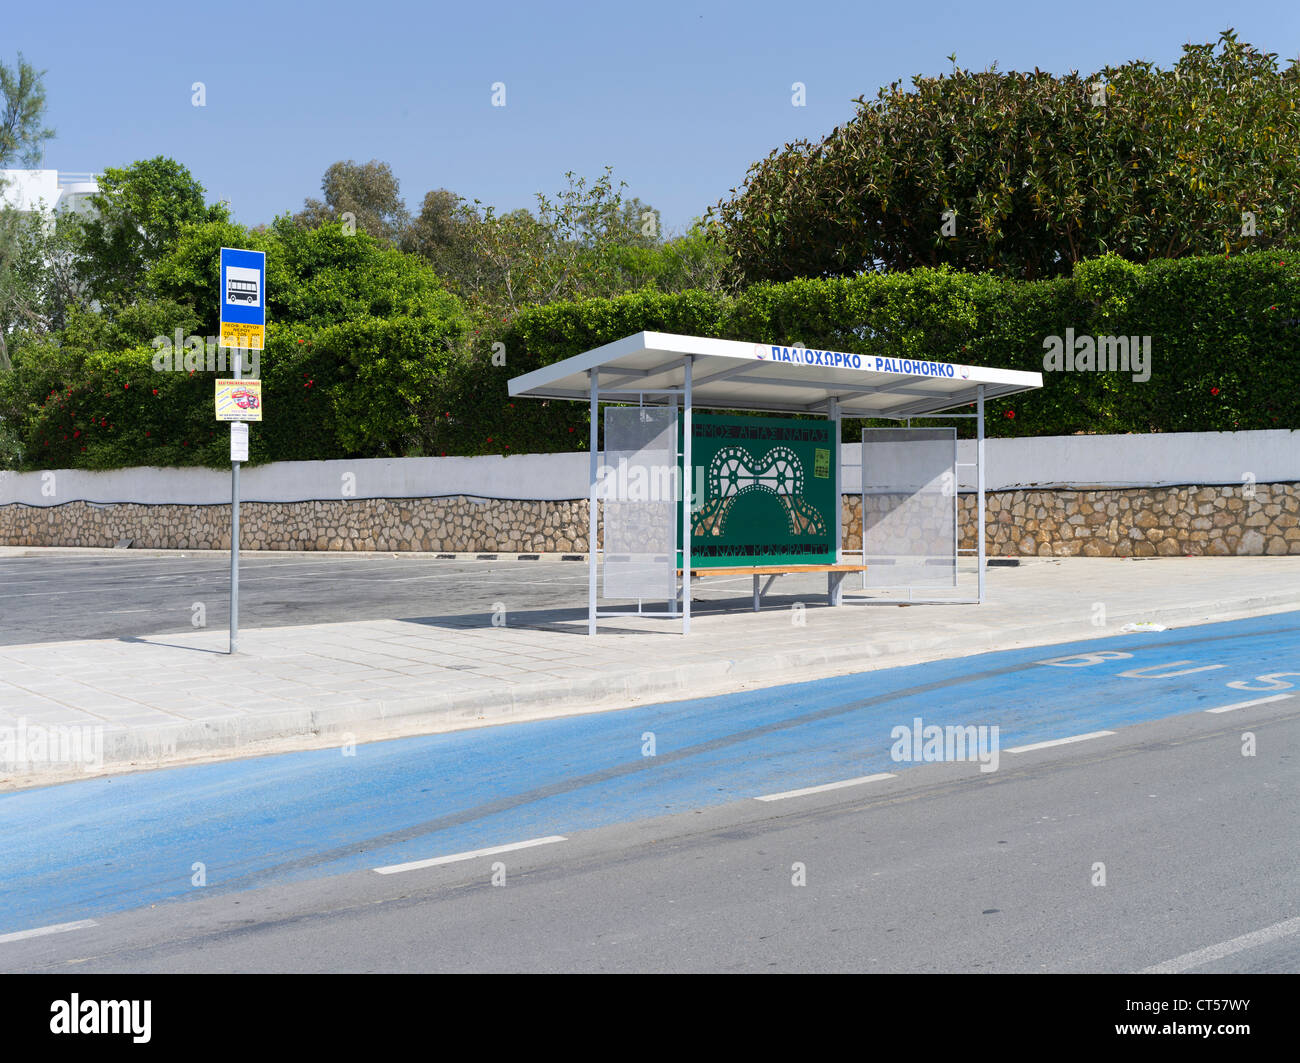 dh  AYIA NAPA CYPRUS Cypriot bus stop shelter greece busstop outdoor Stock Photo